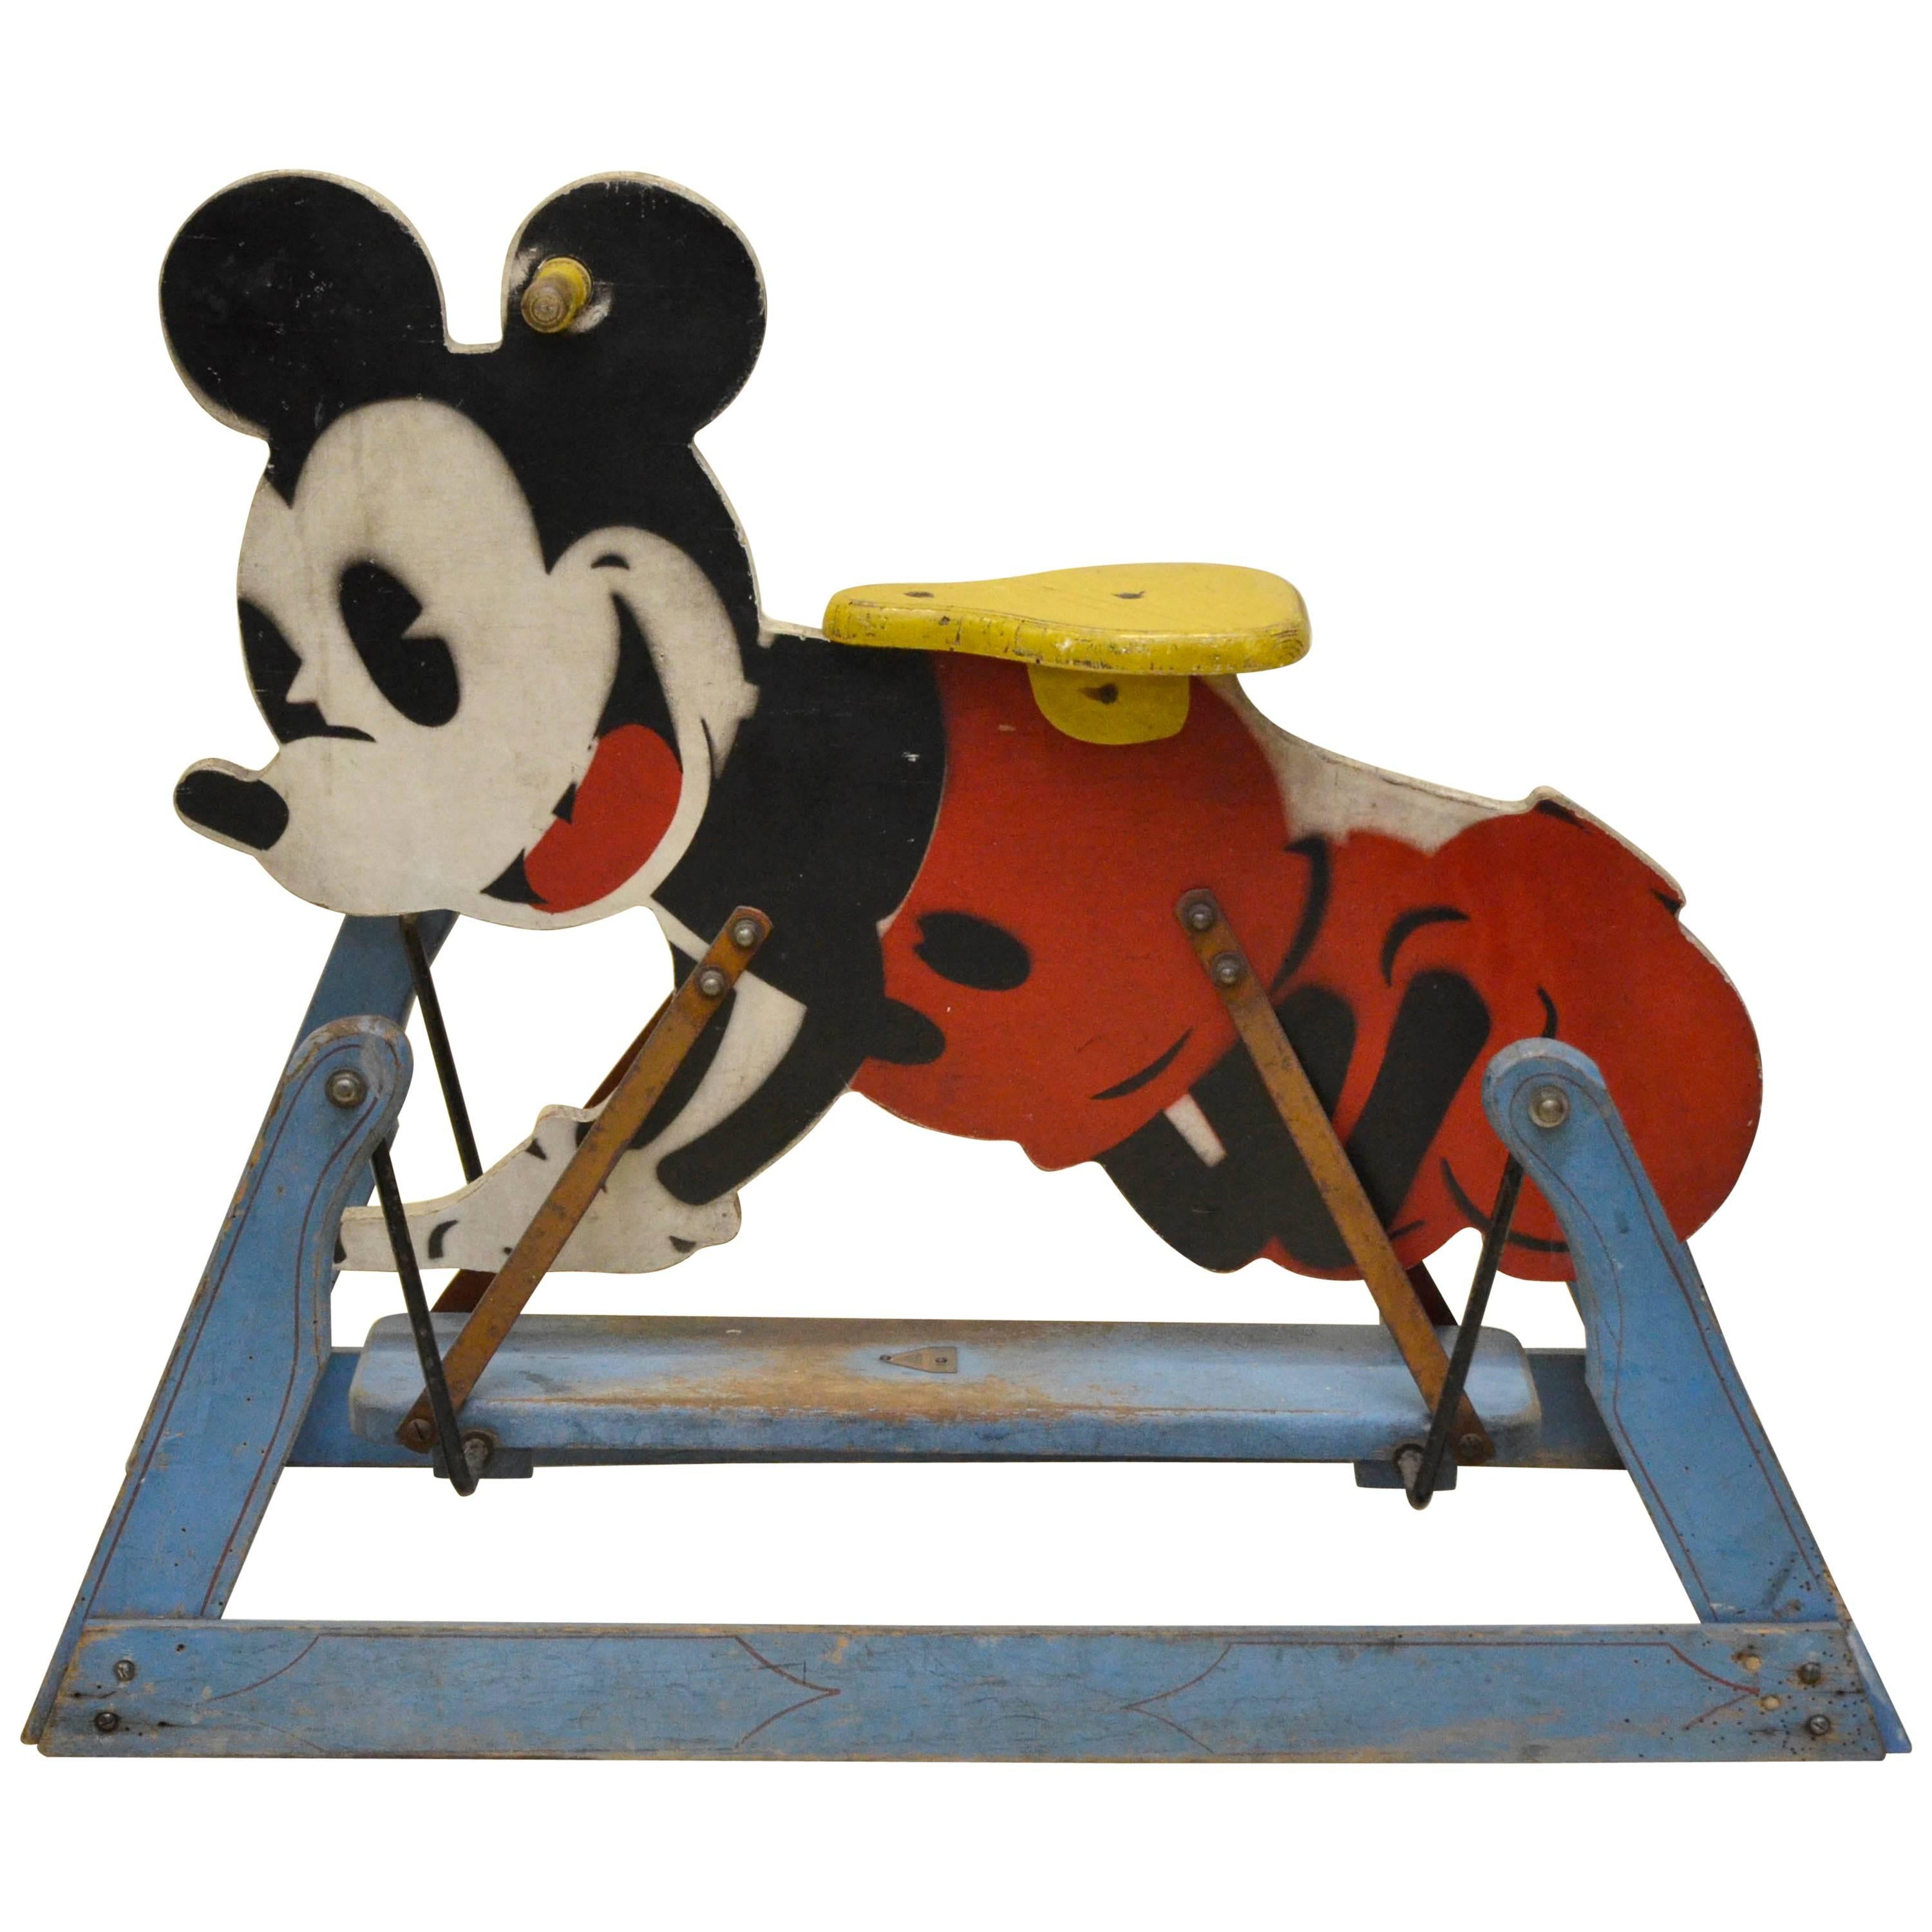 1940s Painted Wooden Tri-Ang Rocking Mickey Mouse Toy Made in England For Sale